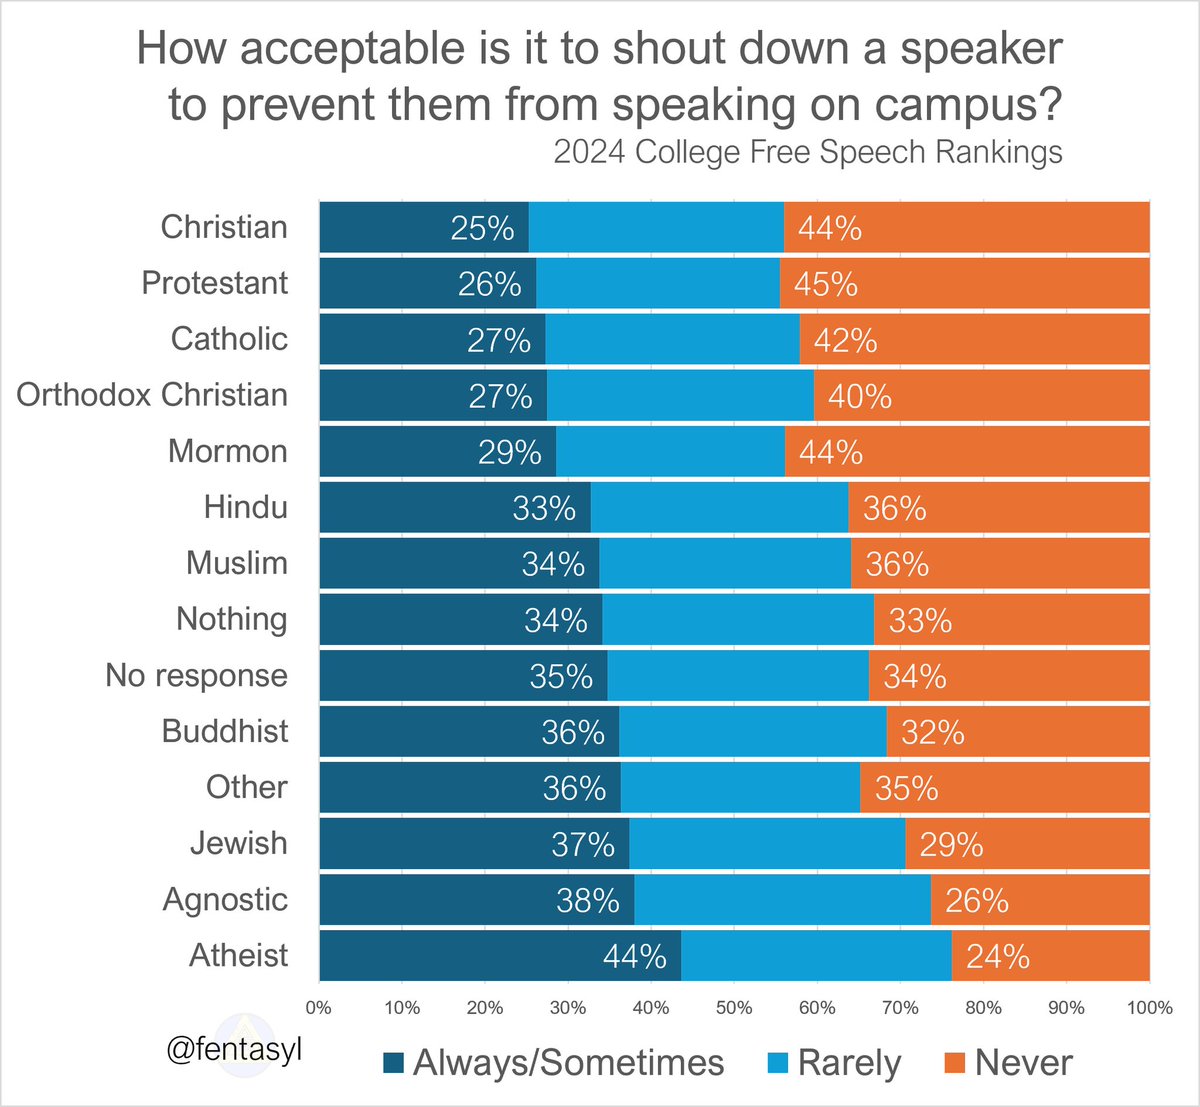 I thought the point of Atheism was to escape the alleged intolerant nature of religion.

Yet it seems that Atheists are the most censorious demographic when compared to their religious counterparts.

How did Atheists get to this point?